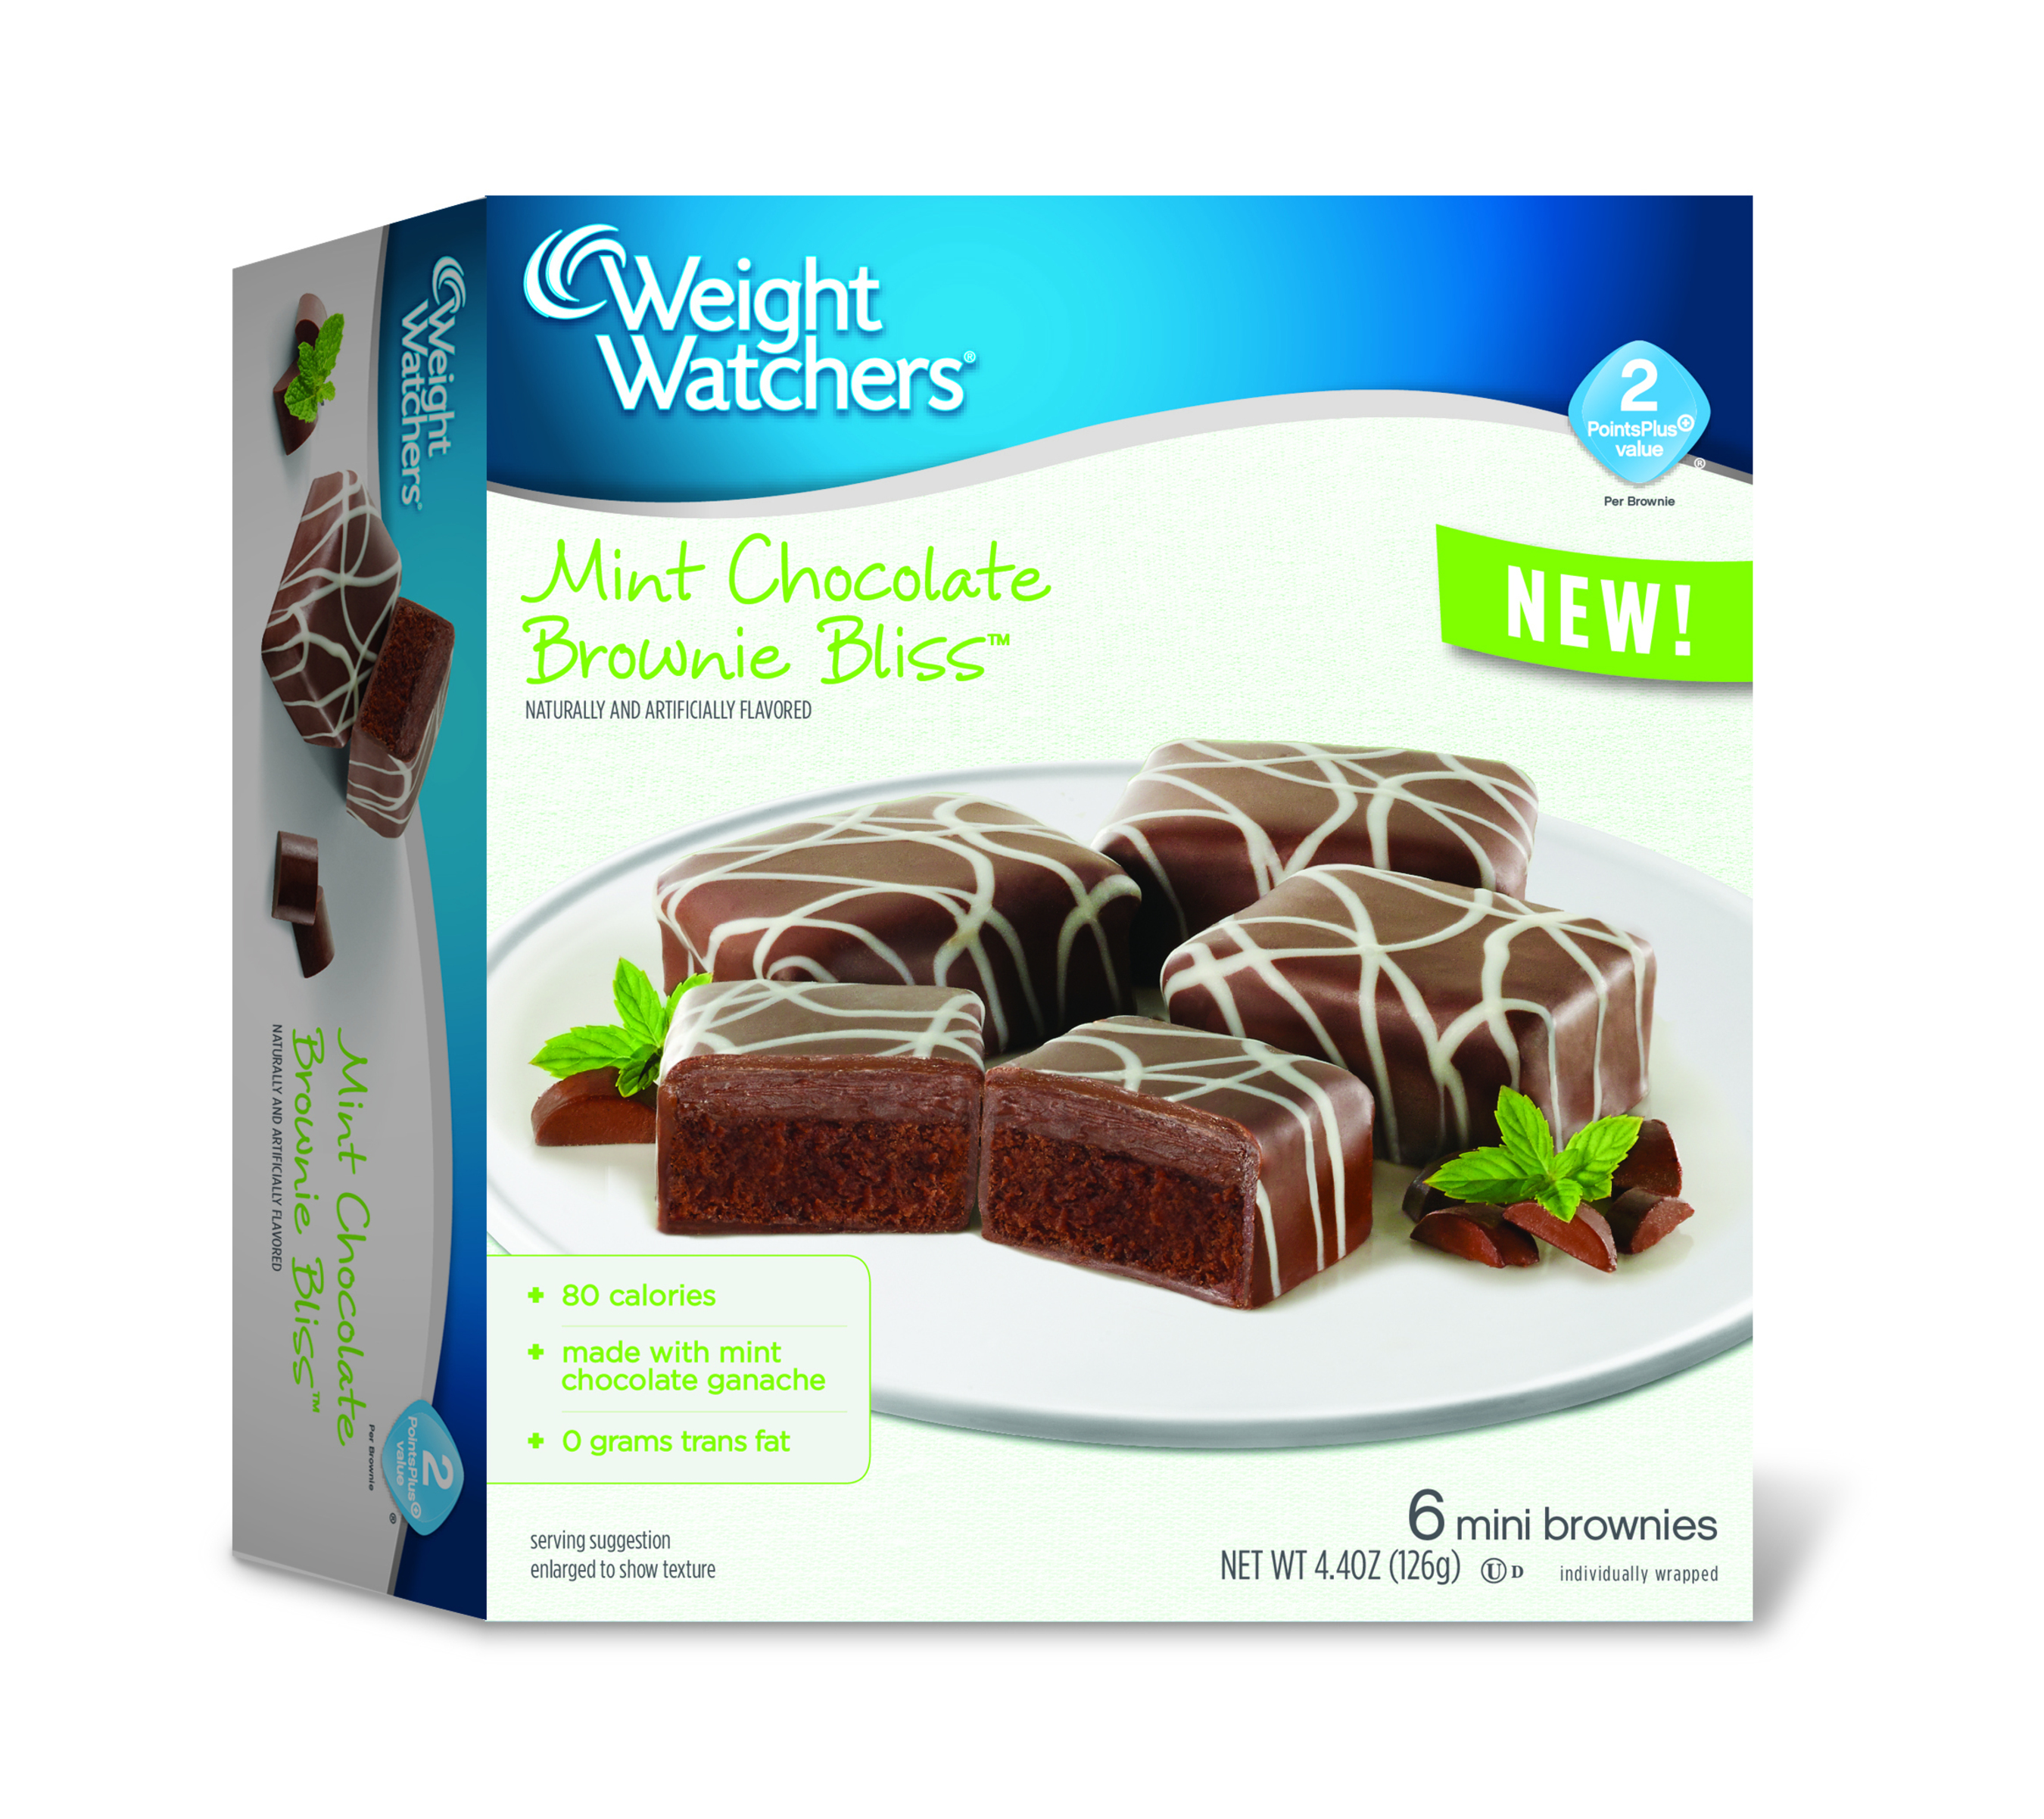 Mint Chocolate Brownie Bliss(TM) is a rich chocolate brownie, layered with velvety, mint chocolate ganache and covered in a chocolaty coating. (PRNewsFoto/Weight Watchers Sweet Baked Good)